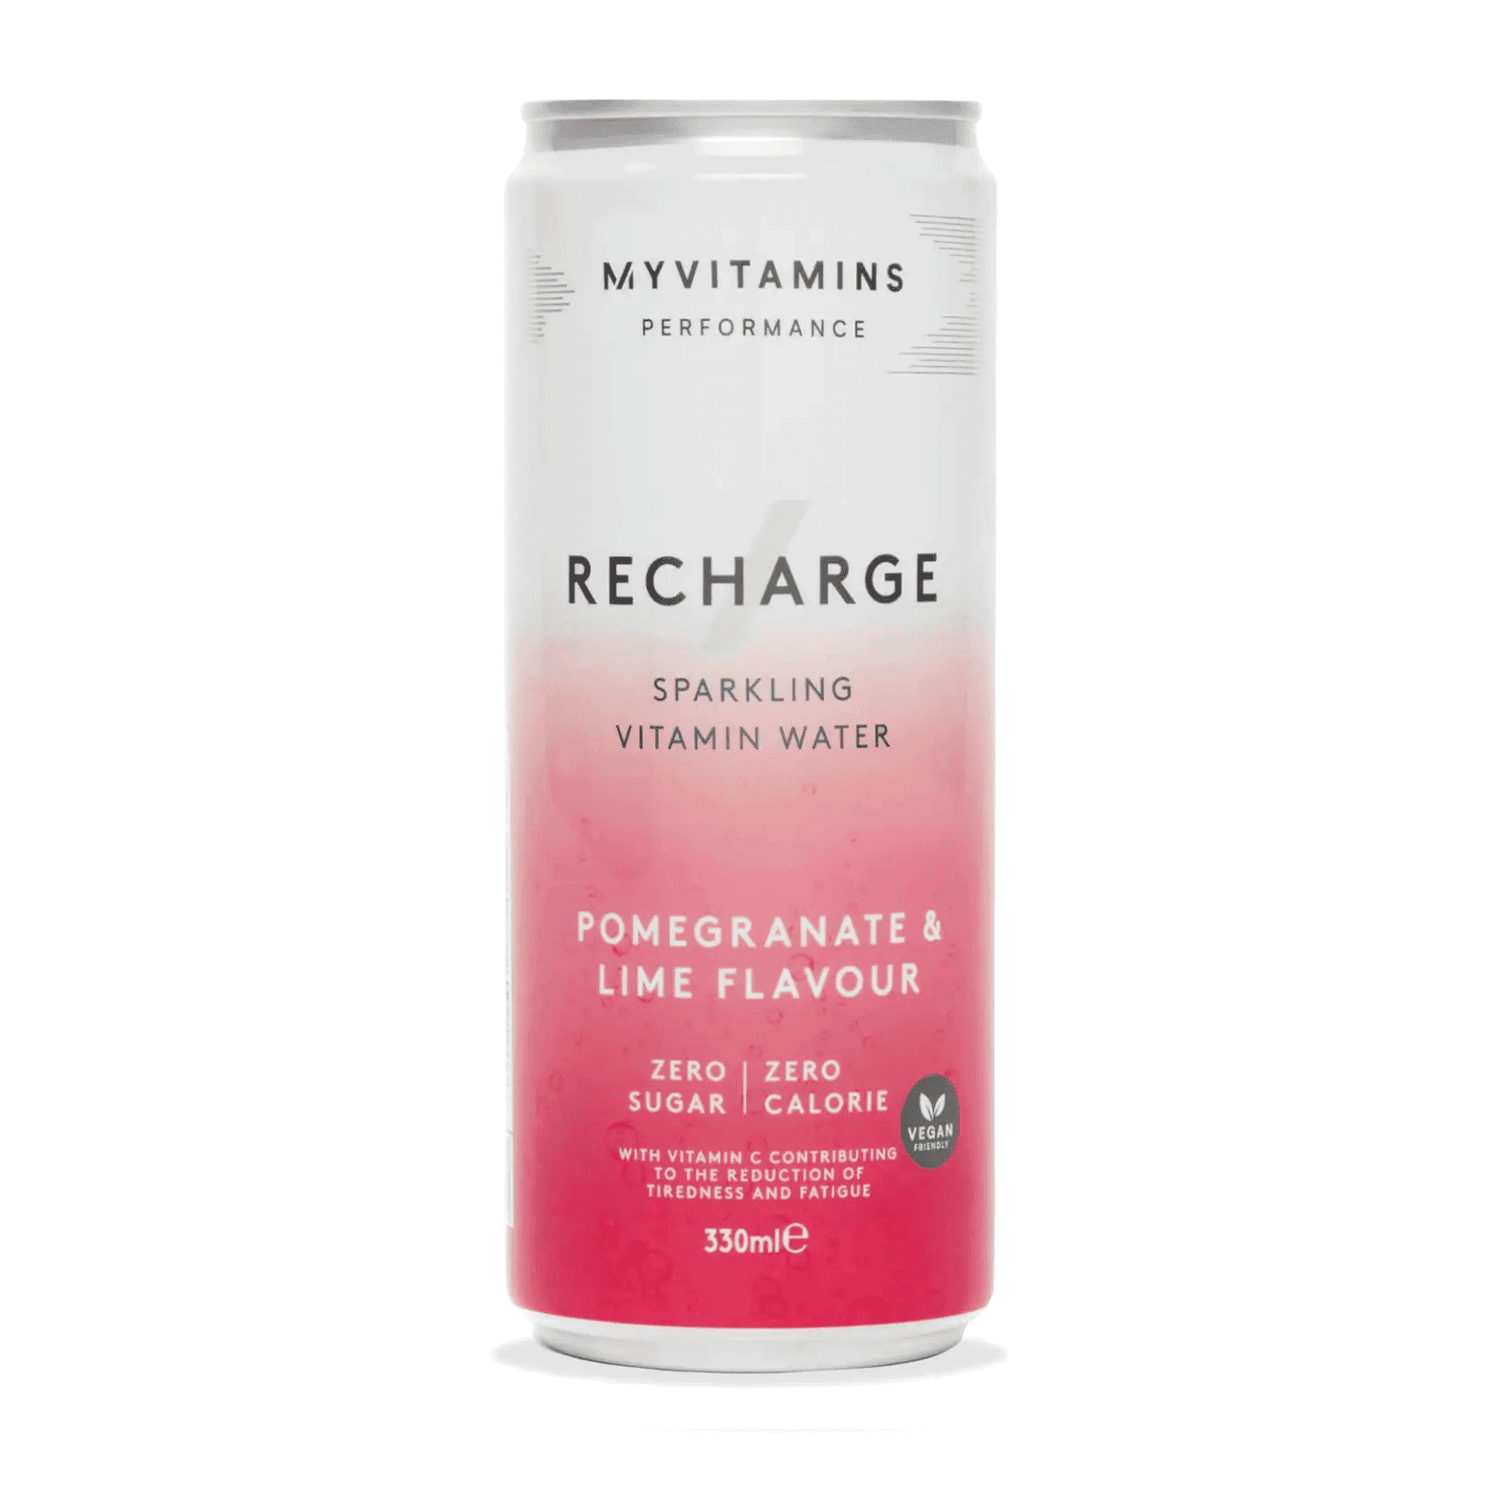 Recharge Dobozos RTD Ital (1db) - Pomegranate & Lime